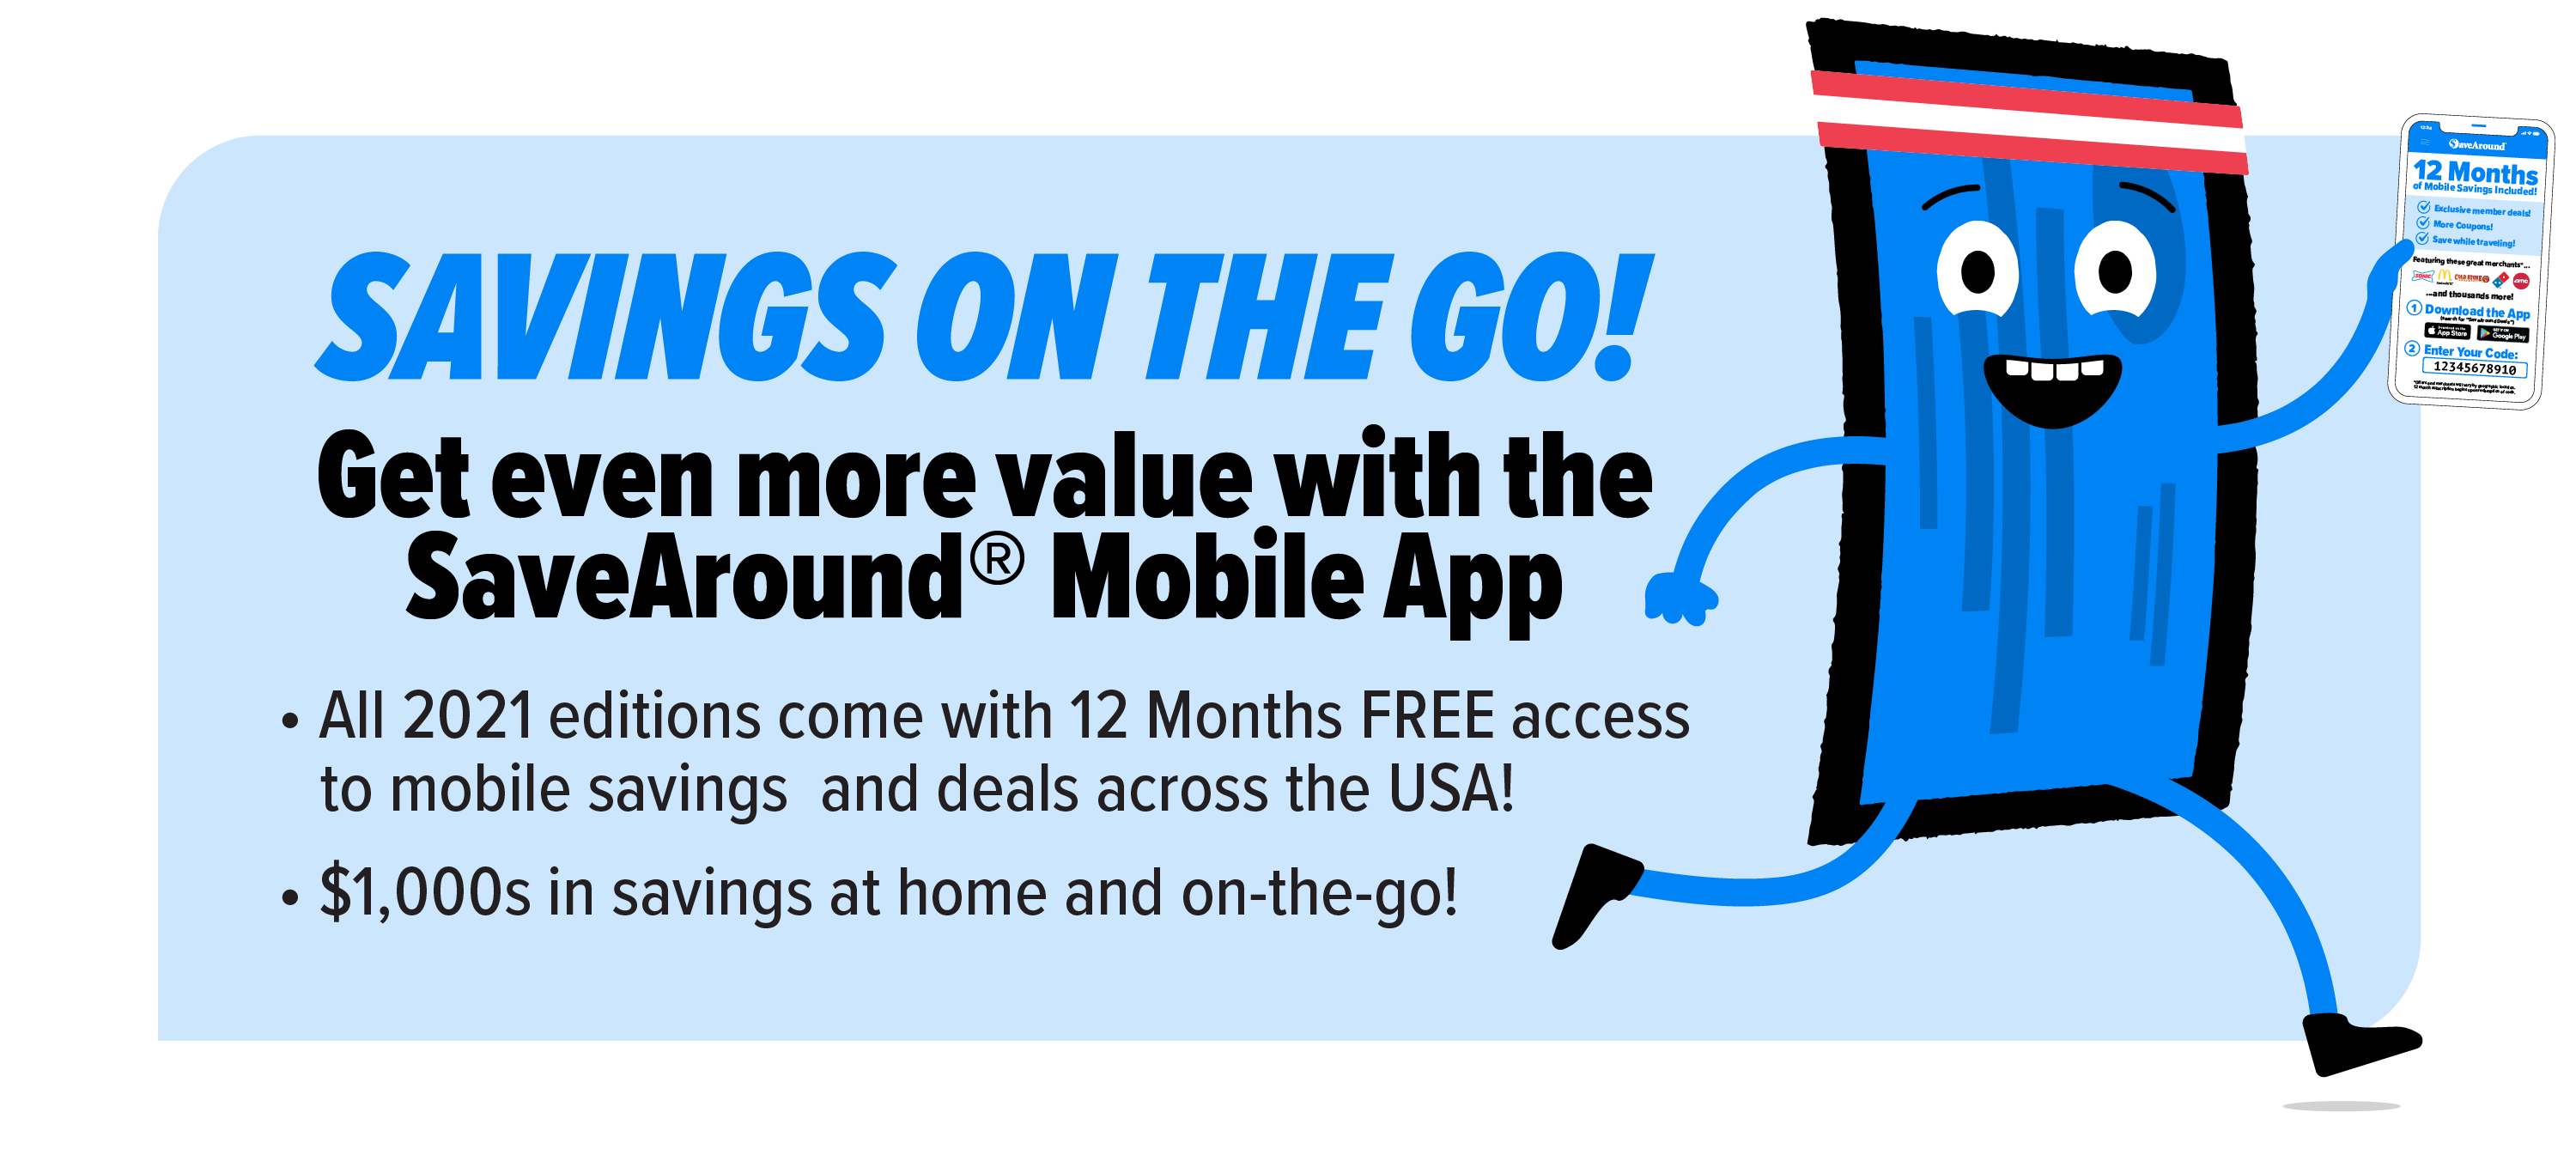 Savings on the Go! Get even more value with the SaveAround® Mobile App! All 2021 editions come with 12 Months FREE access	to mobile savings and deals across the USA! $1,000s in savings at home and on-the-go!